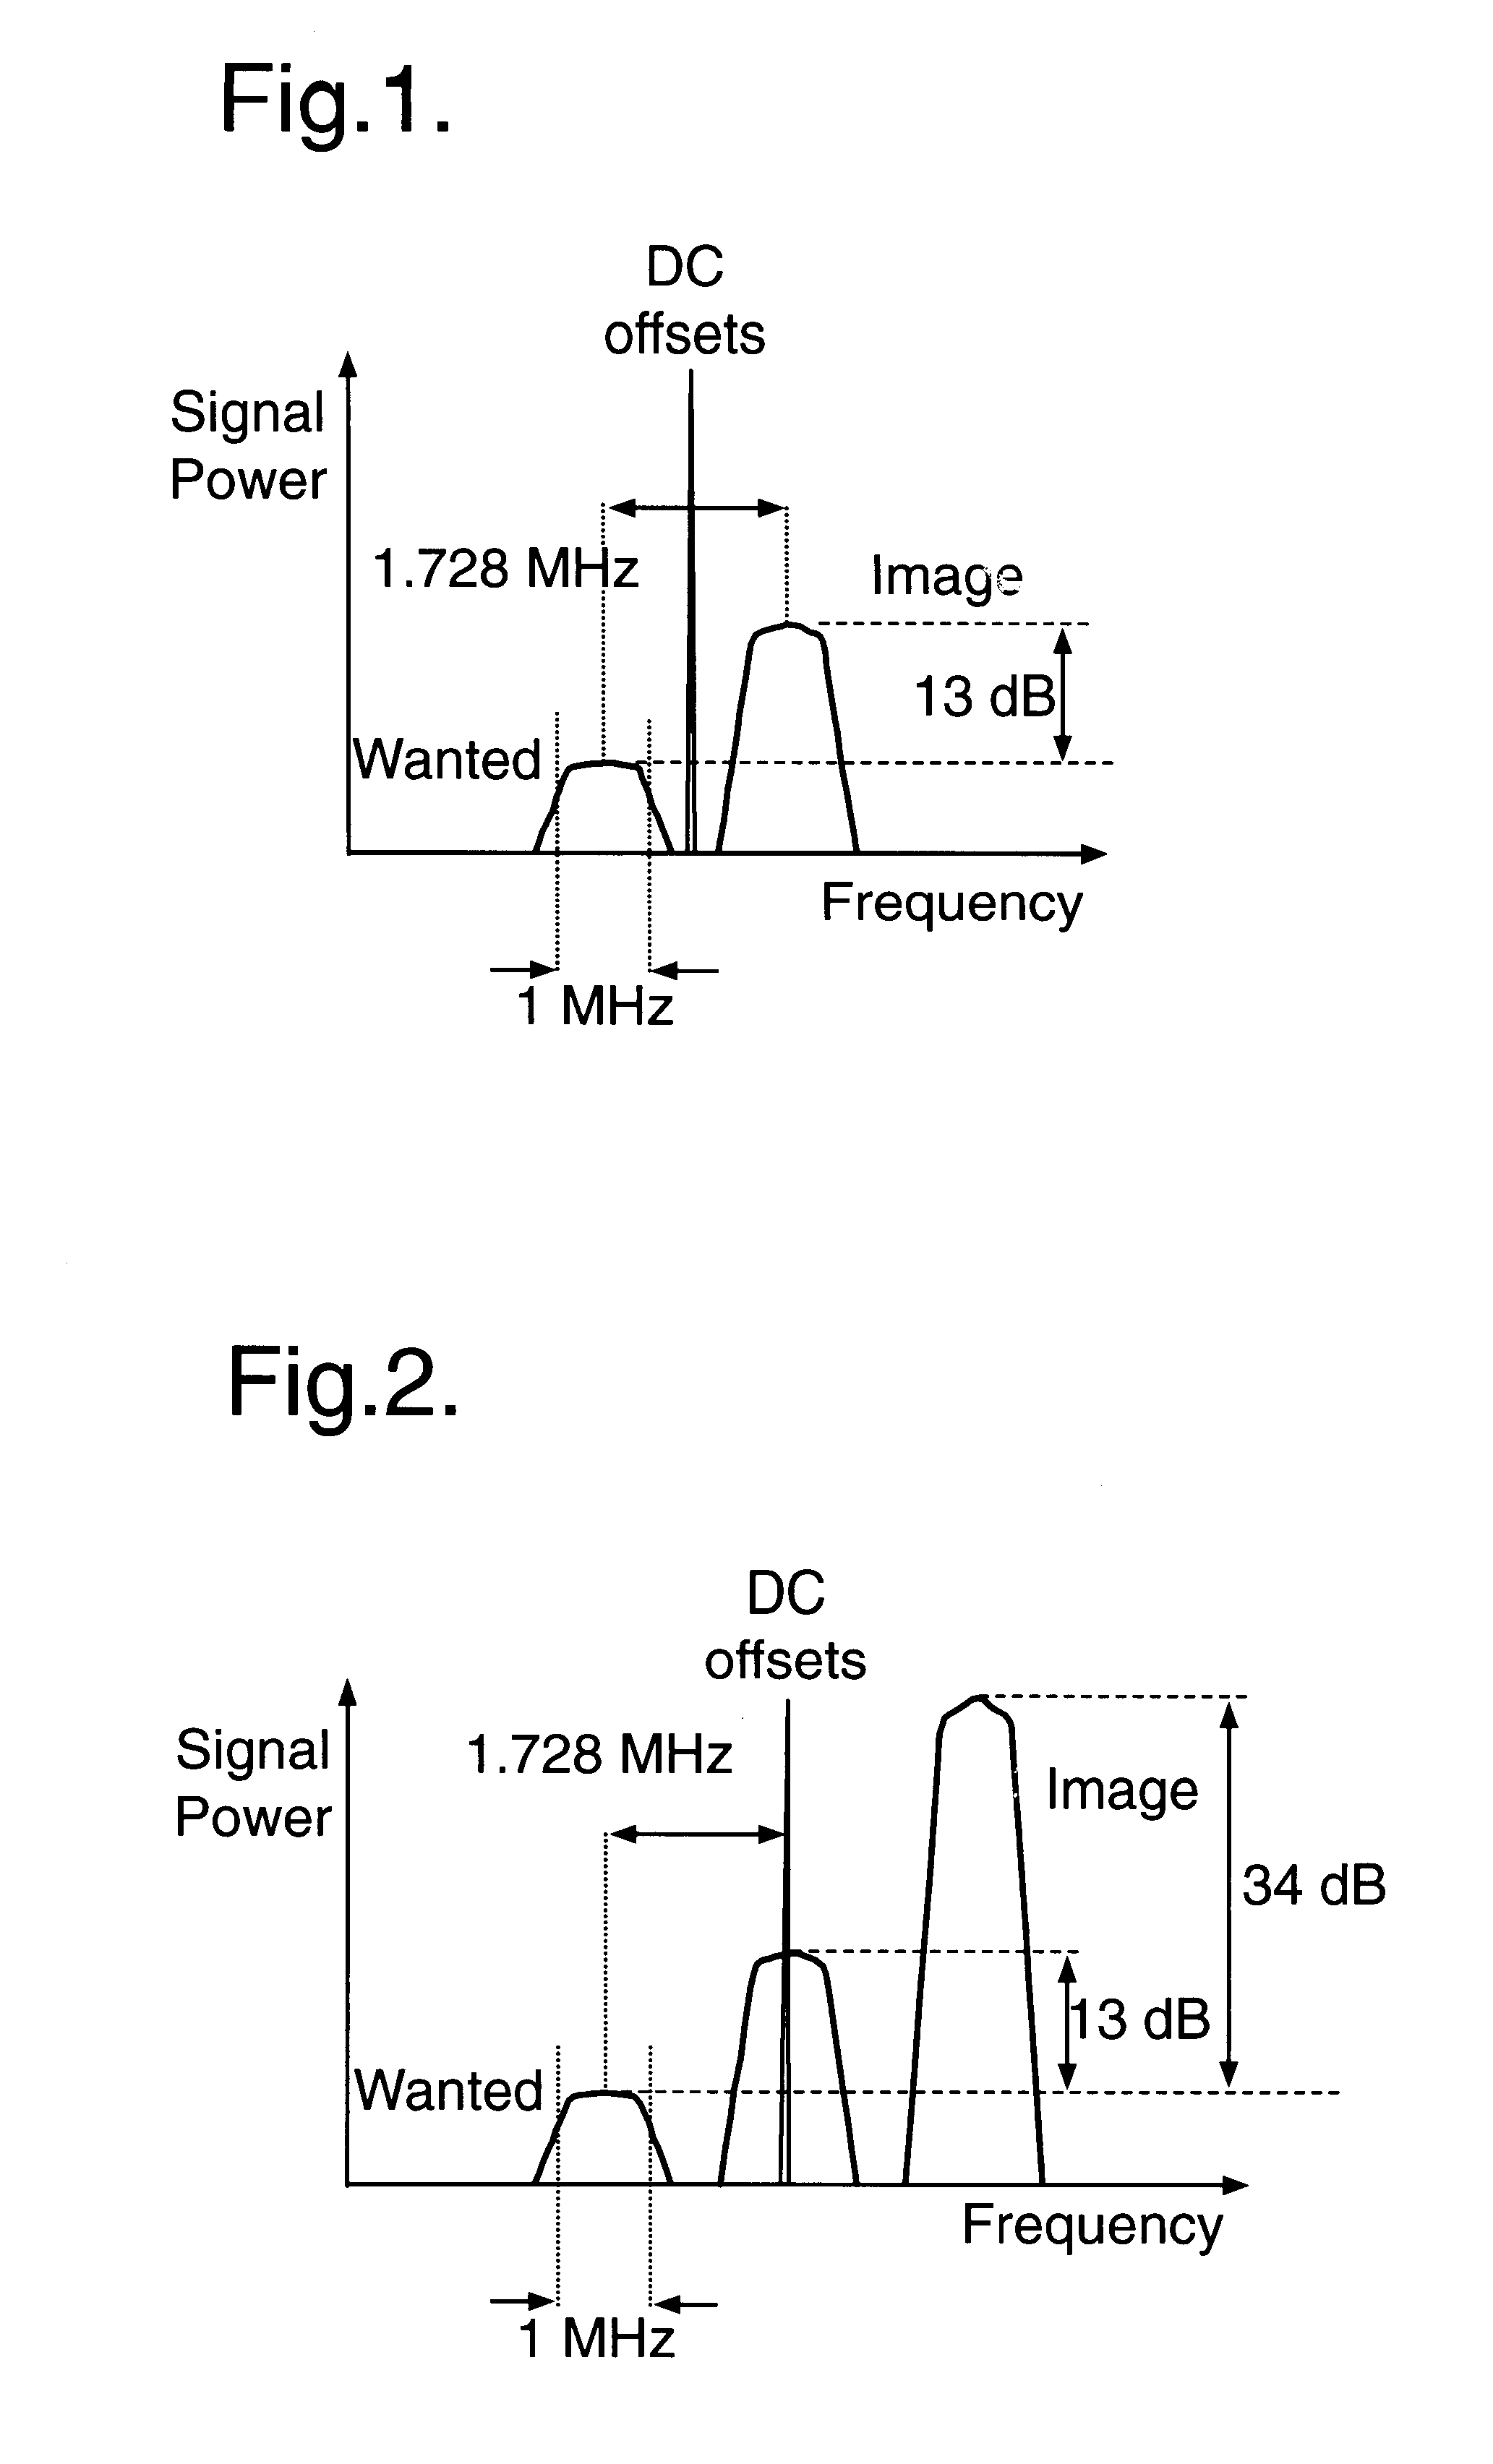 Image reject mixer, circuit, and method for image rejection